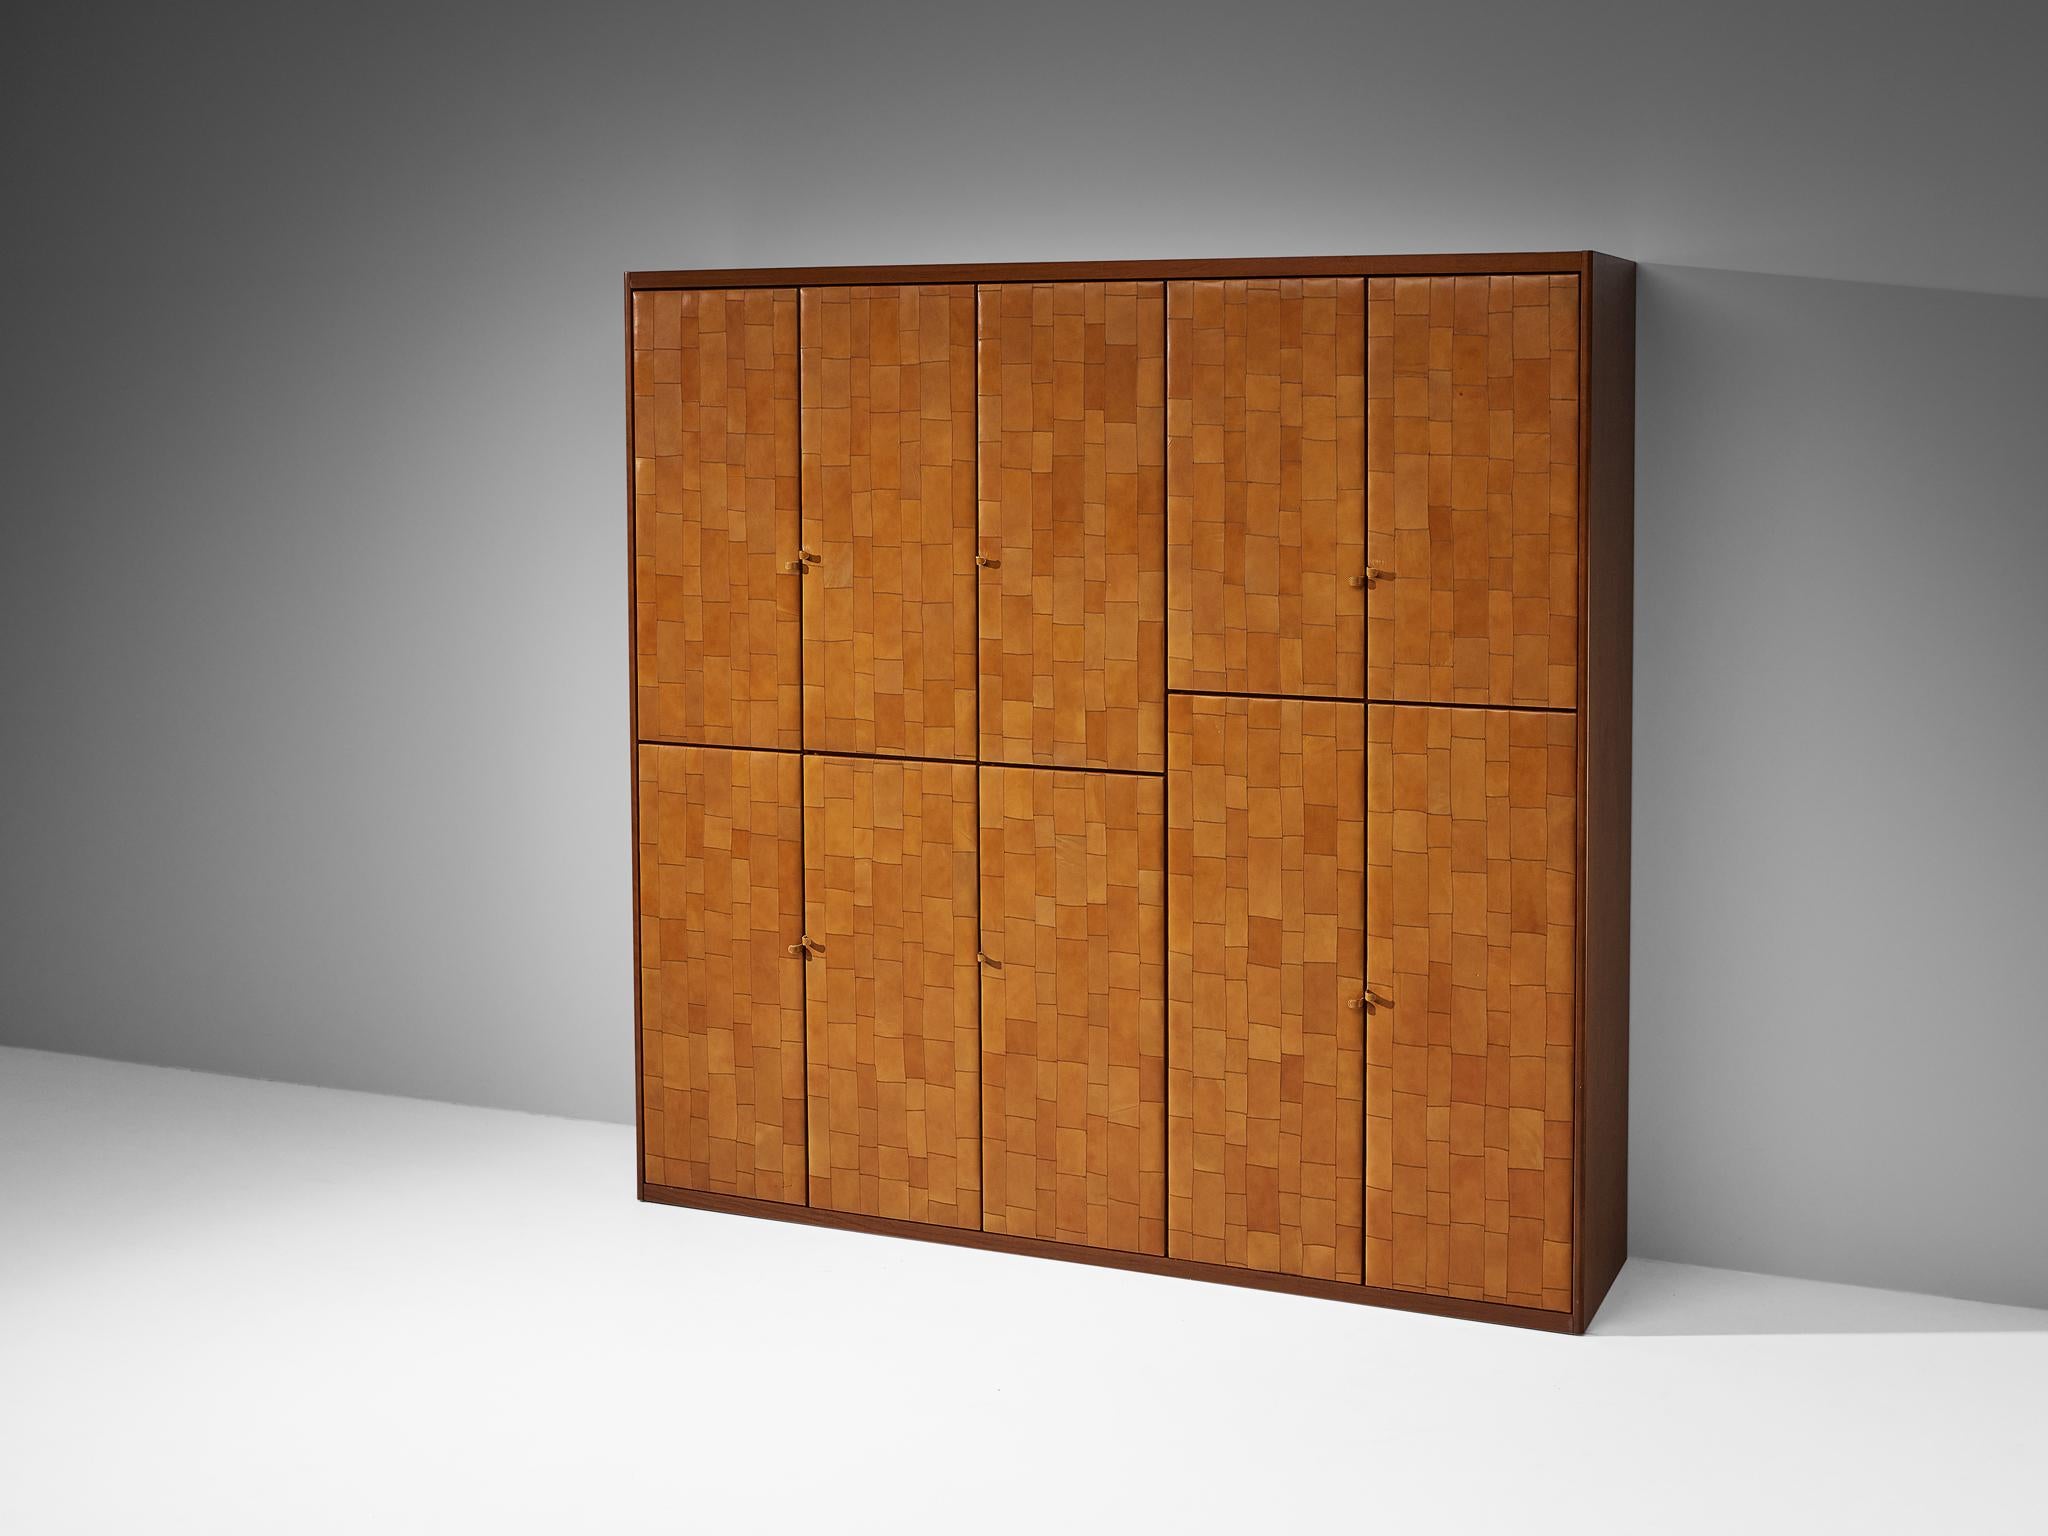 Tito Agnoli for Caleido/Poltrona Frau Highboard in Cognac Patchwork Leather  For Sale 4